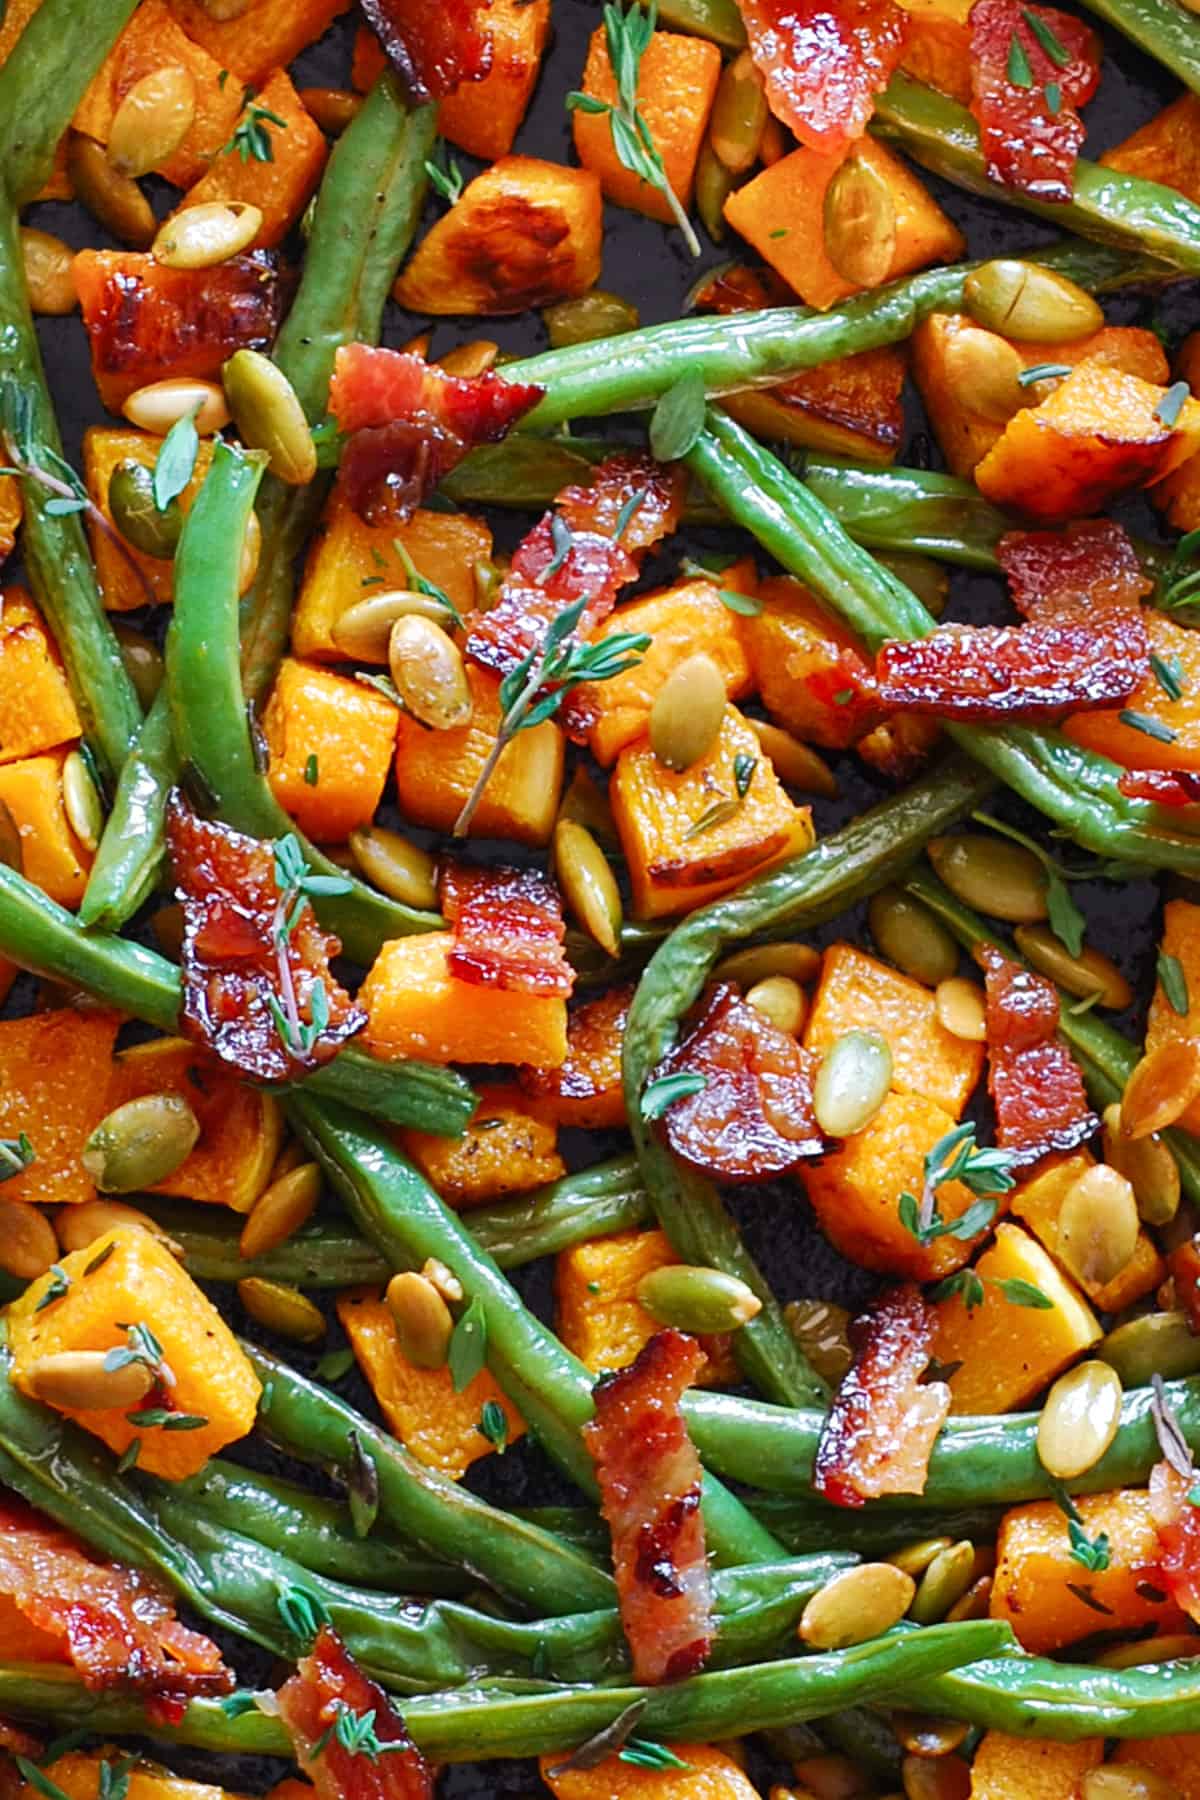 Thanksgiving Roasted Vegetables (Butternut Squash and Green Beans) with Bacon and Pumpkin Seeds.